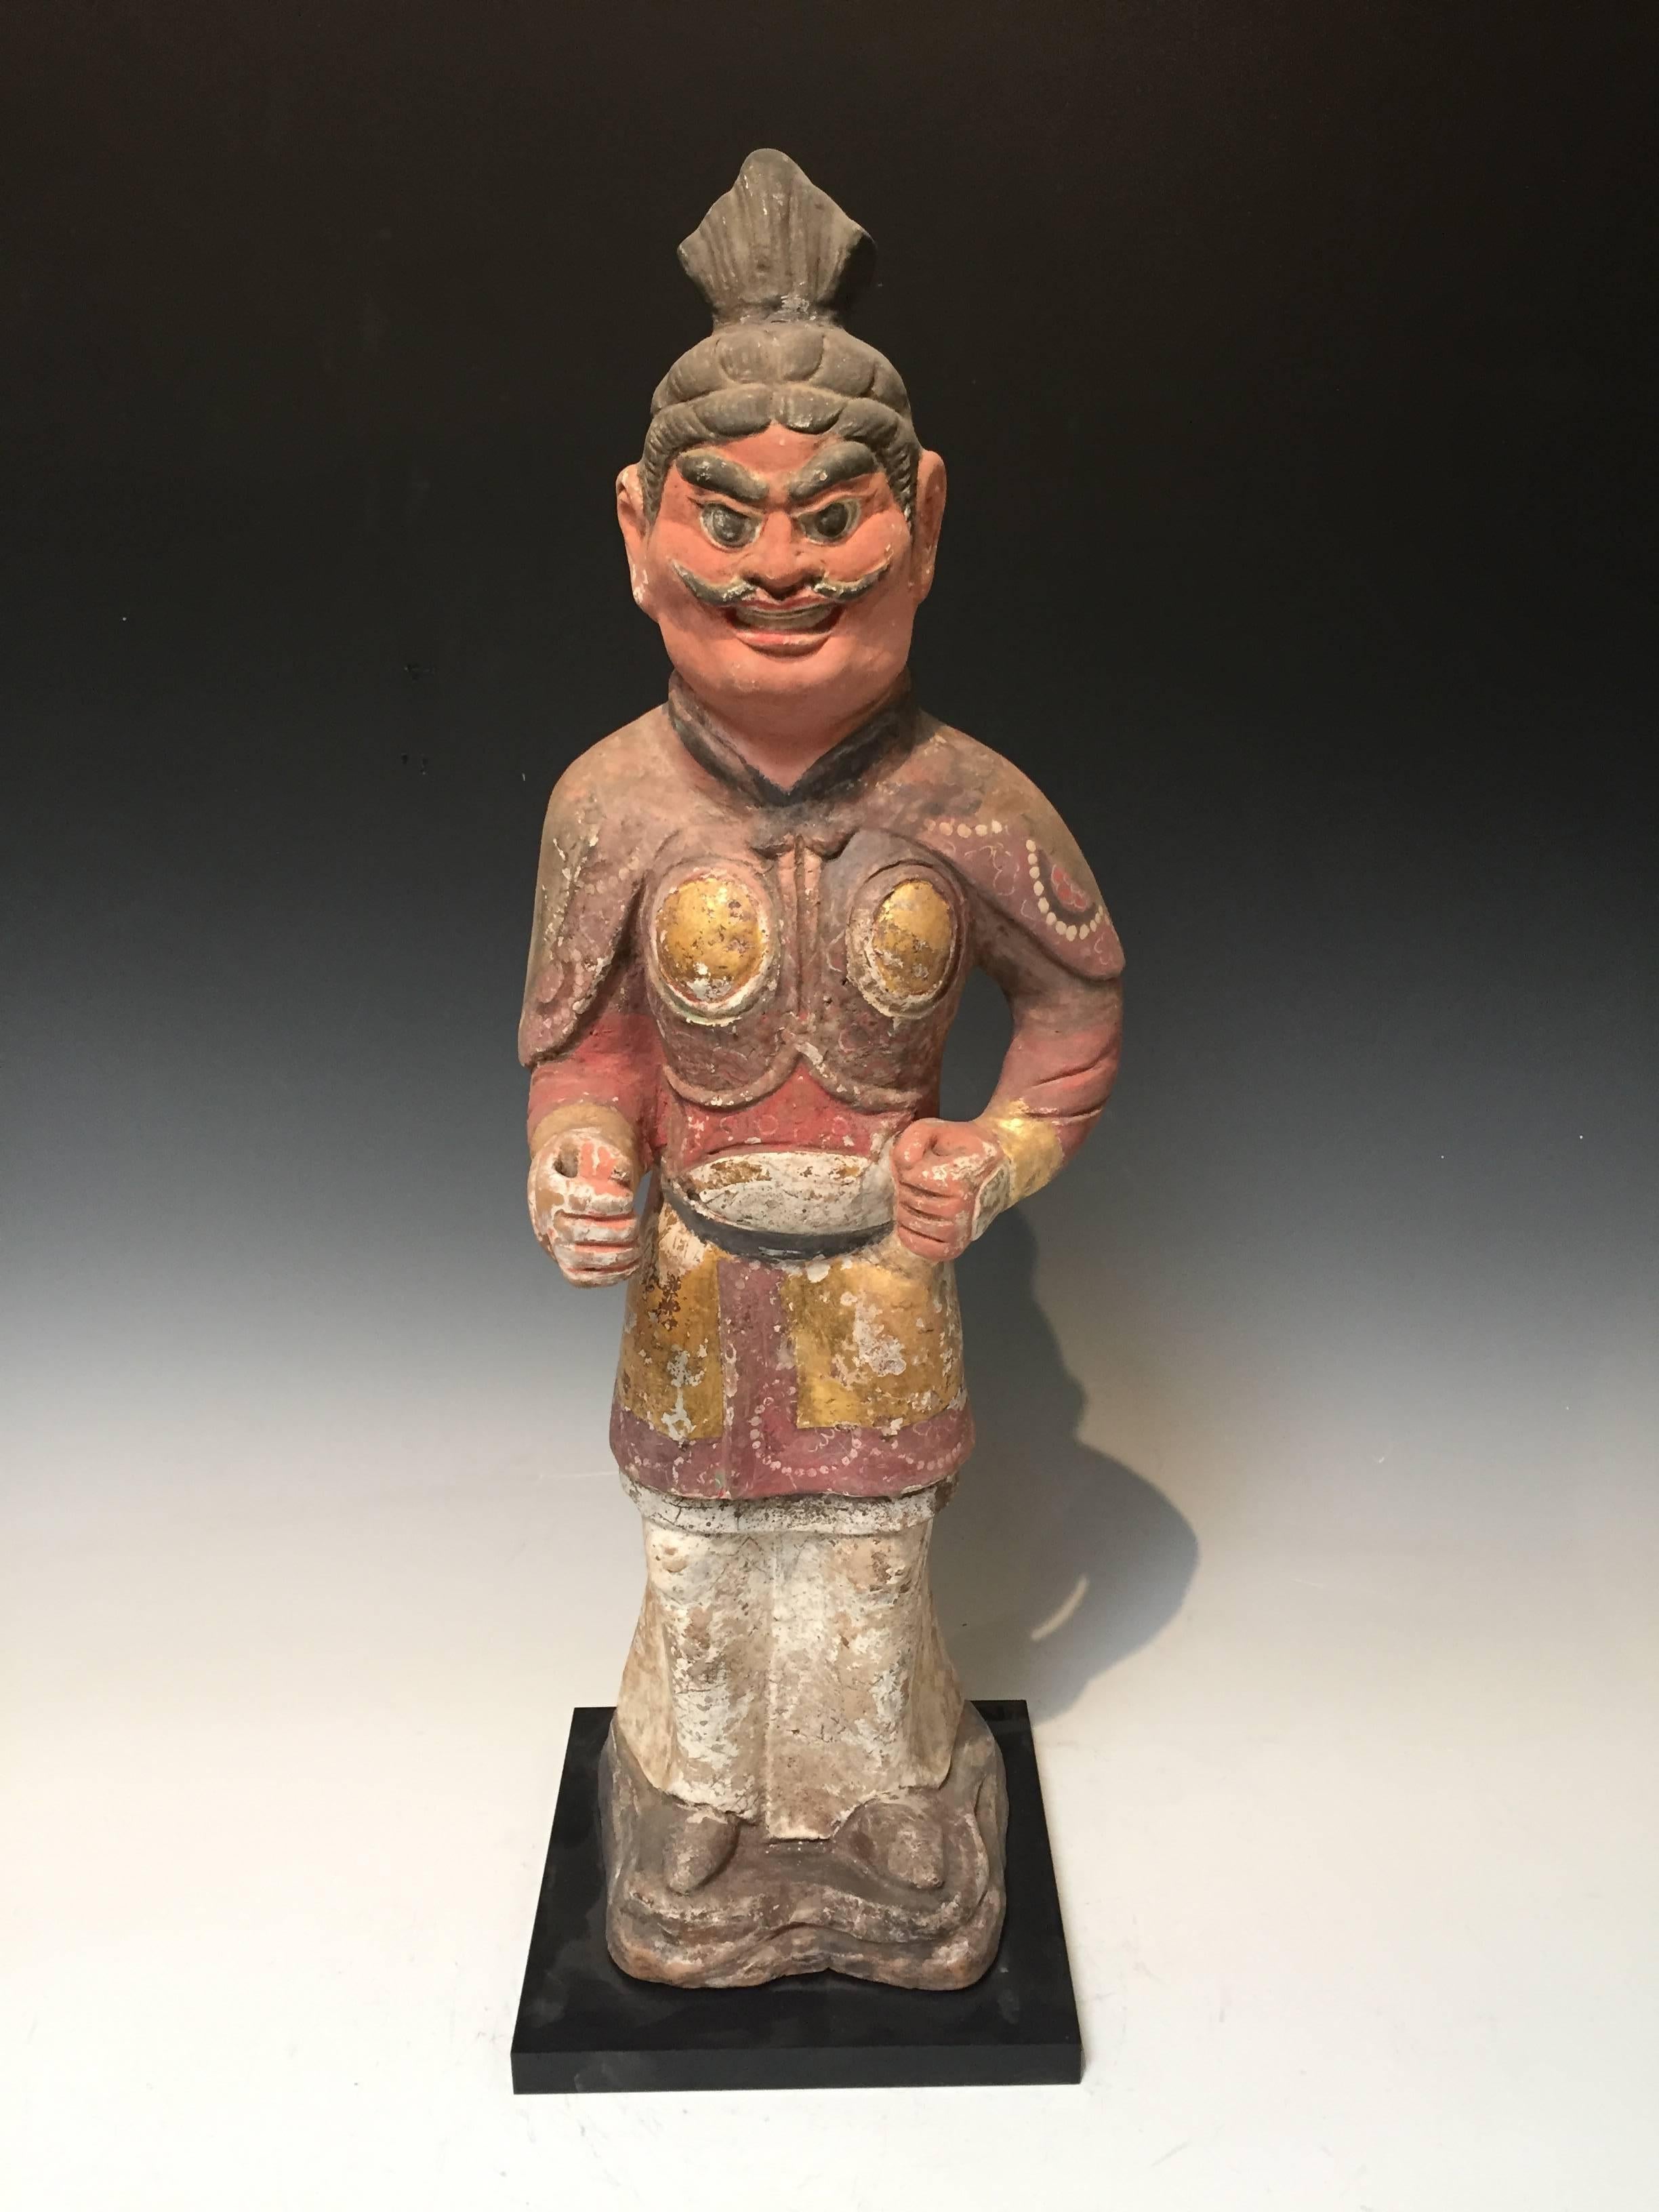 A distinguished Official from the Tang dynasty (618-907 A.D.)
Adorned with gold leaf, and pigments, likely characterizing an important high ranking official.
TL Tested from Oxford.
Standing 22